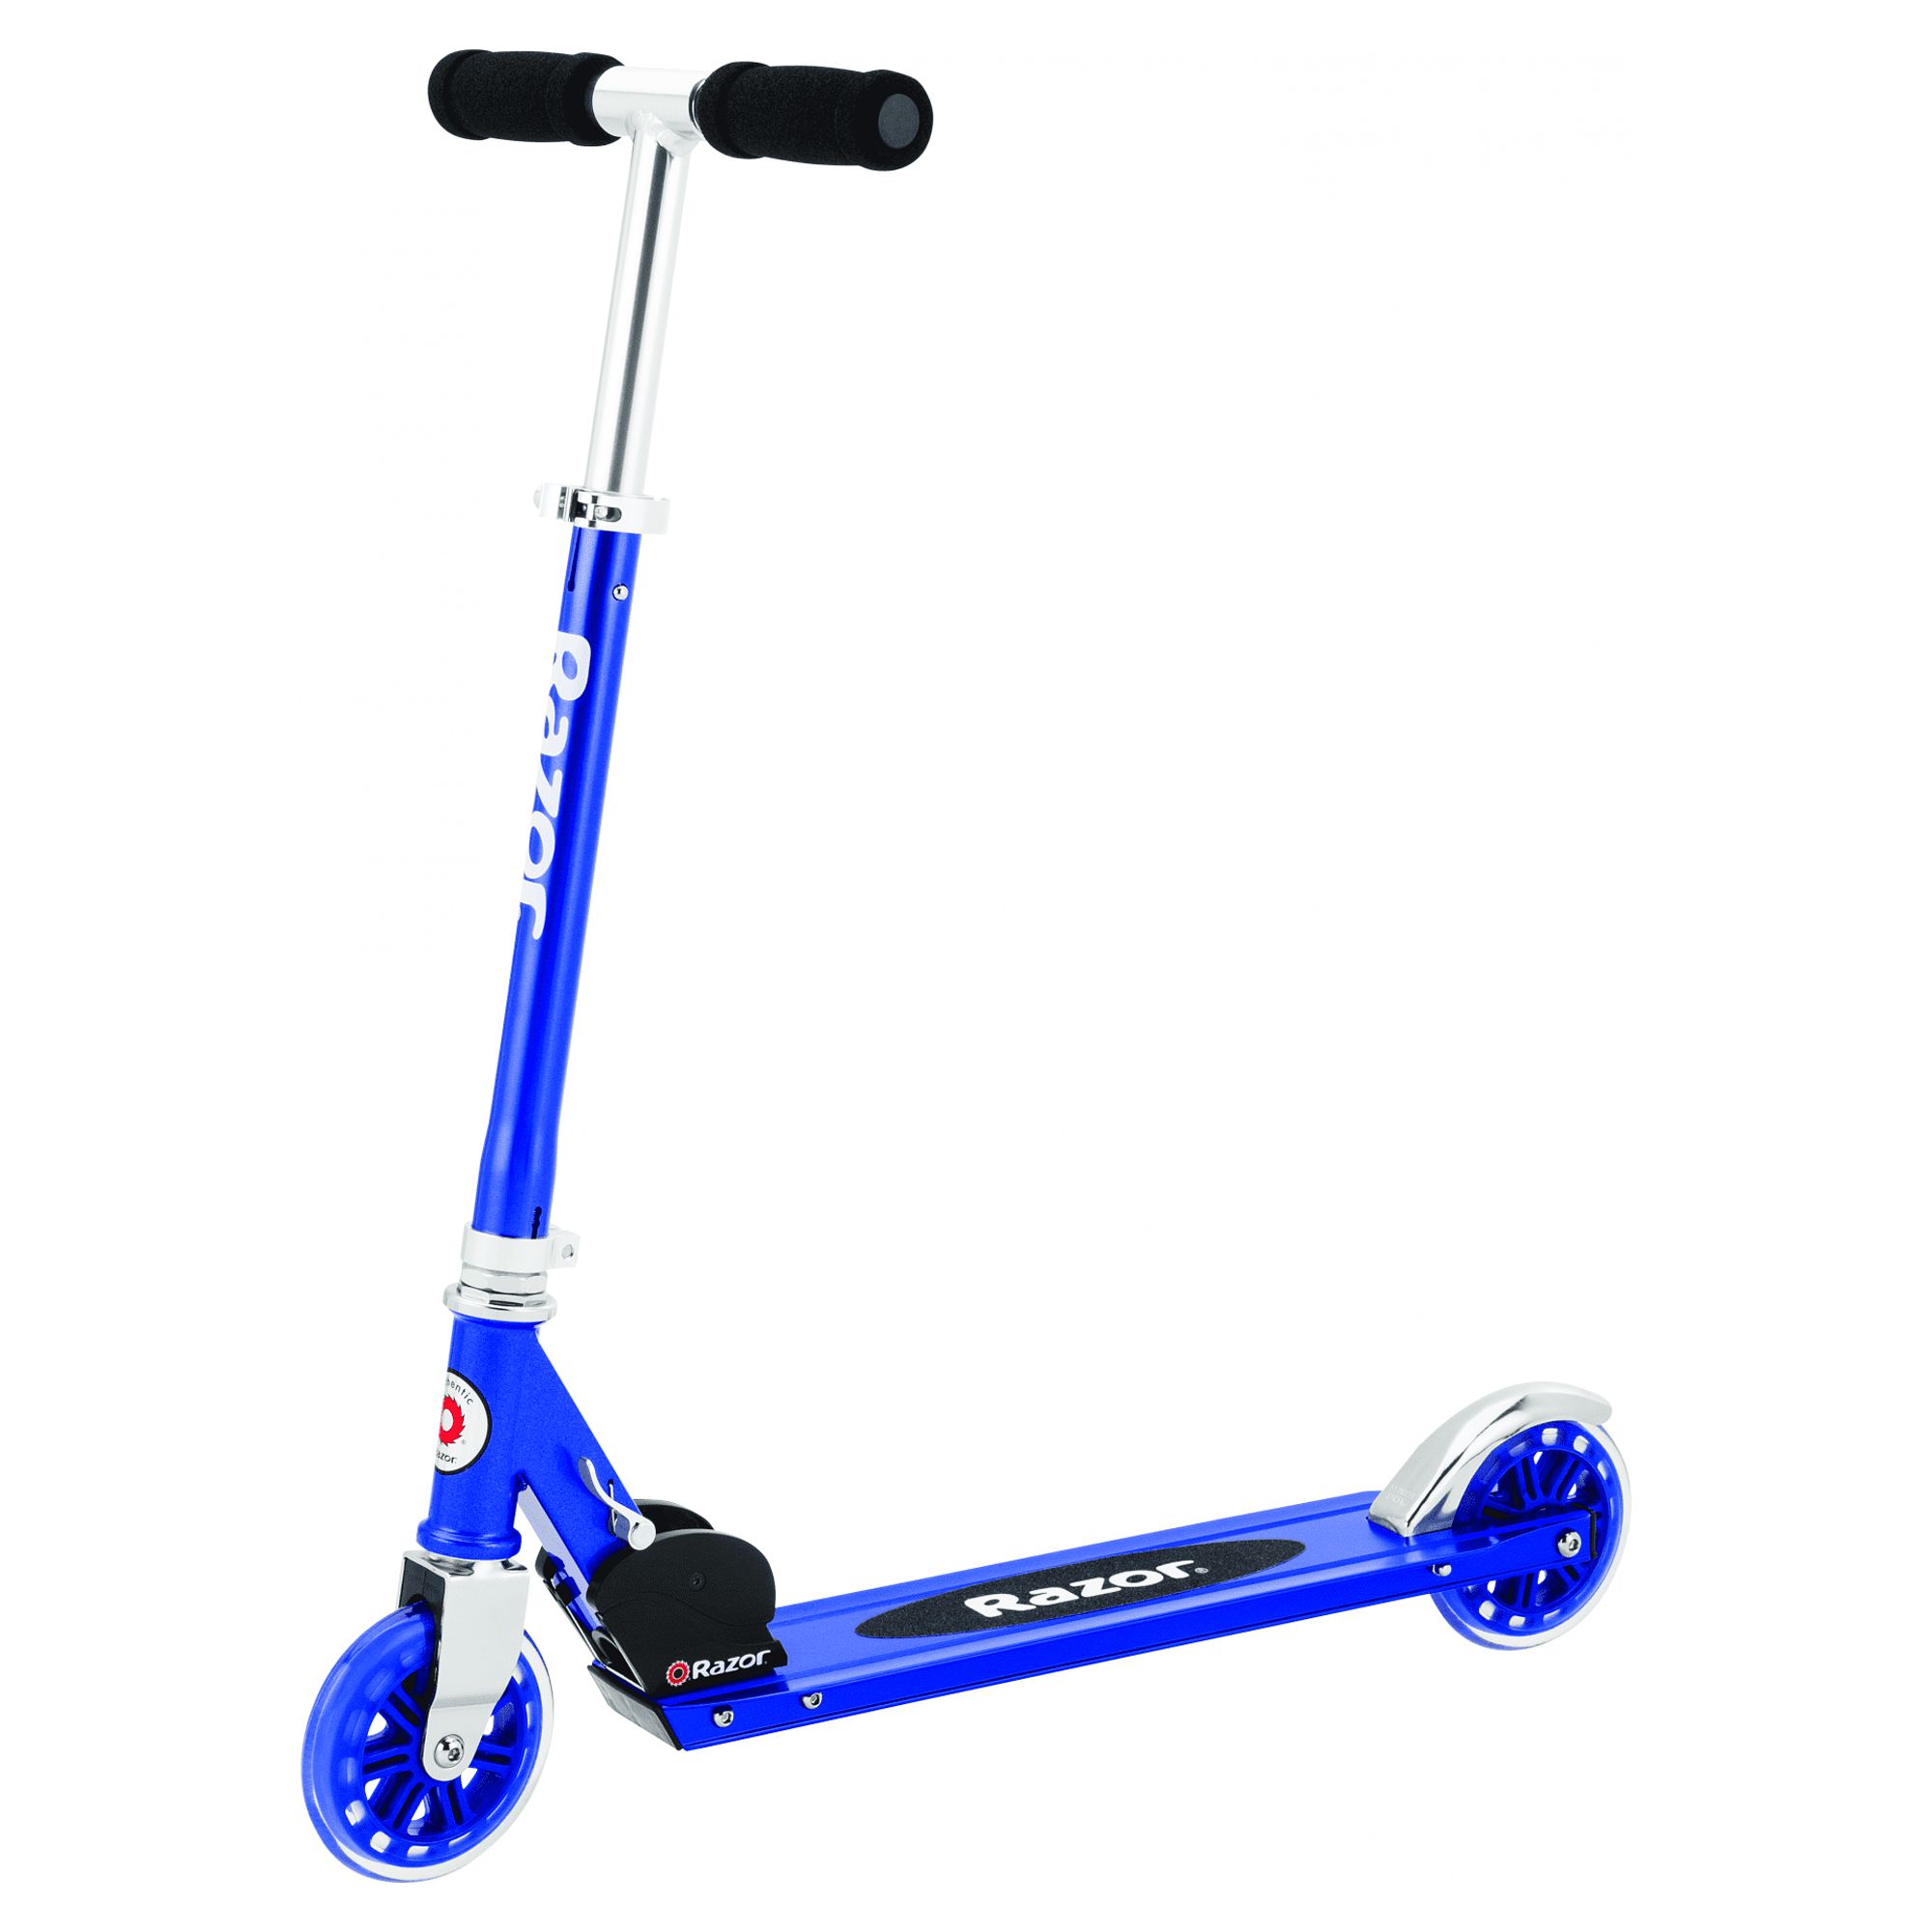 Razor A125 Anodized Kick Scooter for Kids - Lightweight, Foldable, Aluminum Frame, and Adjustable Handlebars - image 1 of 6